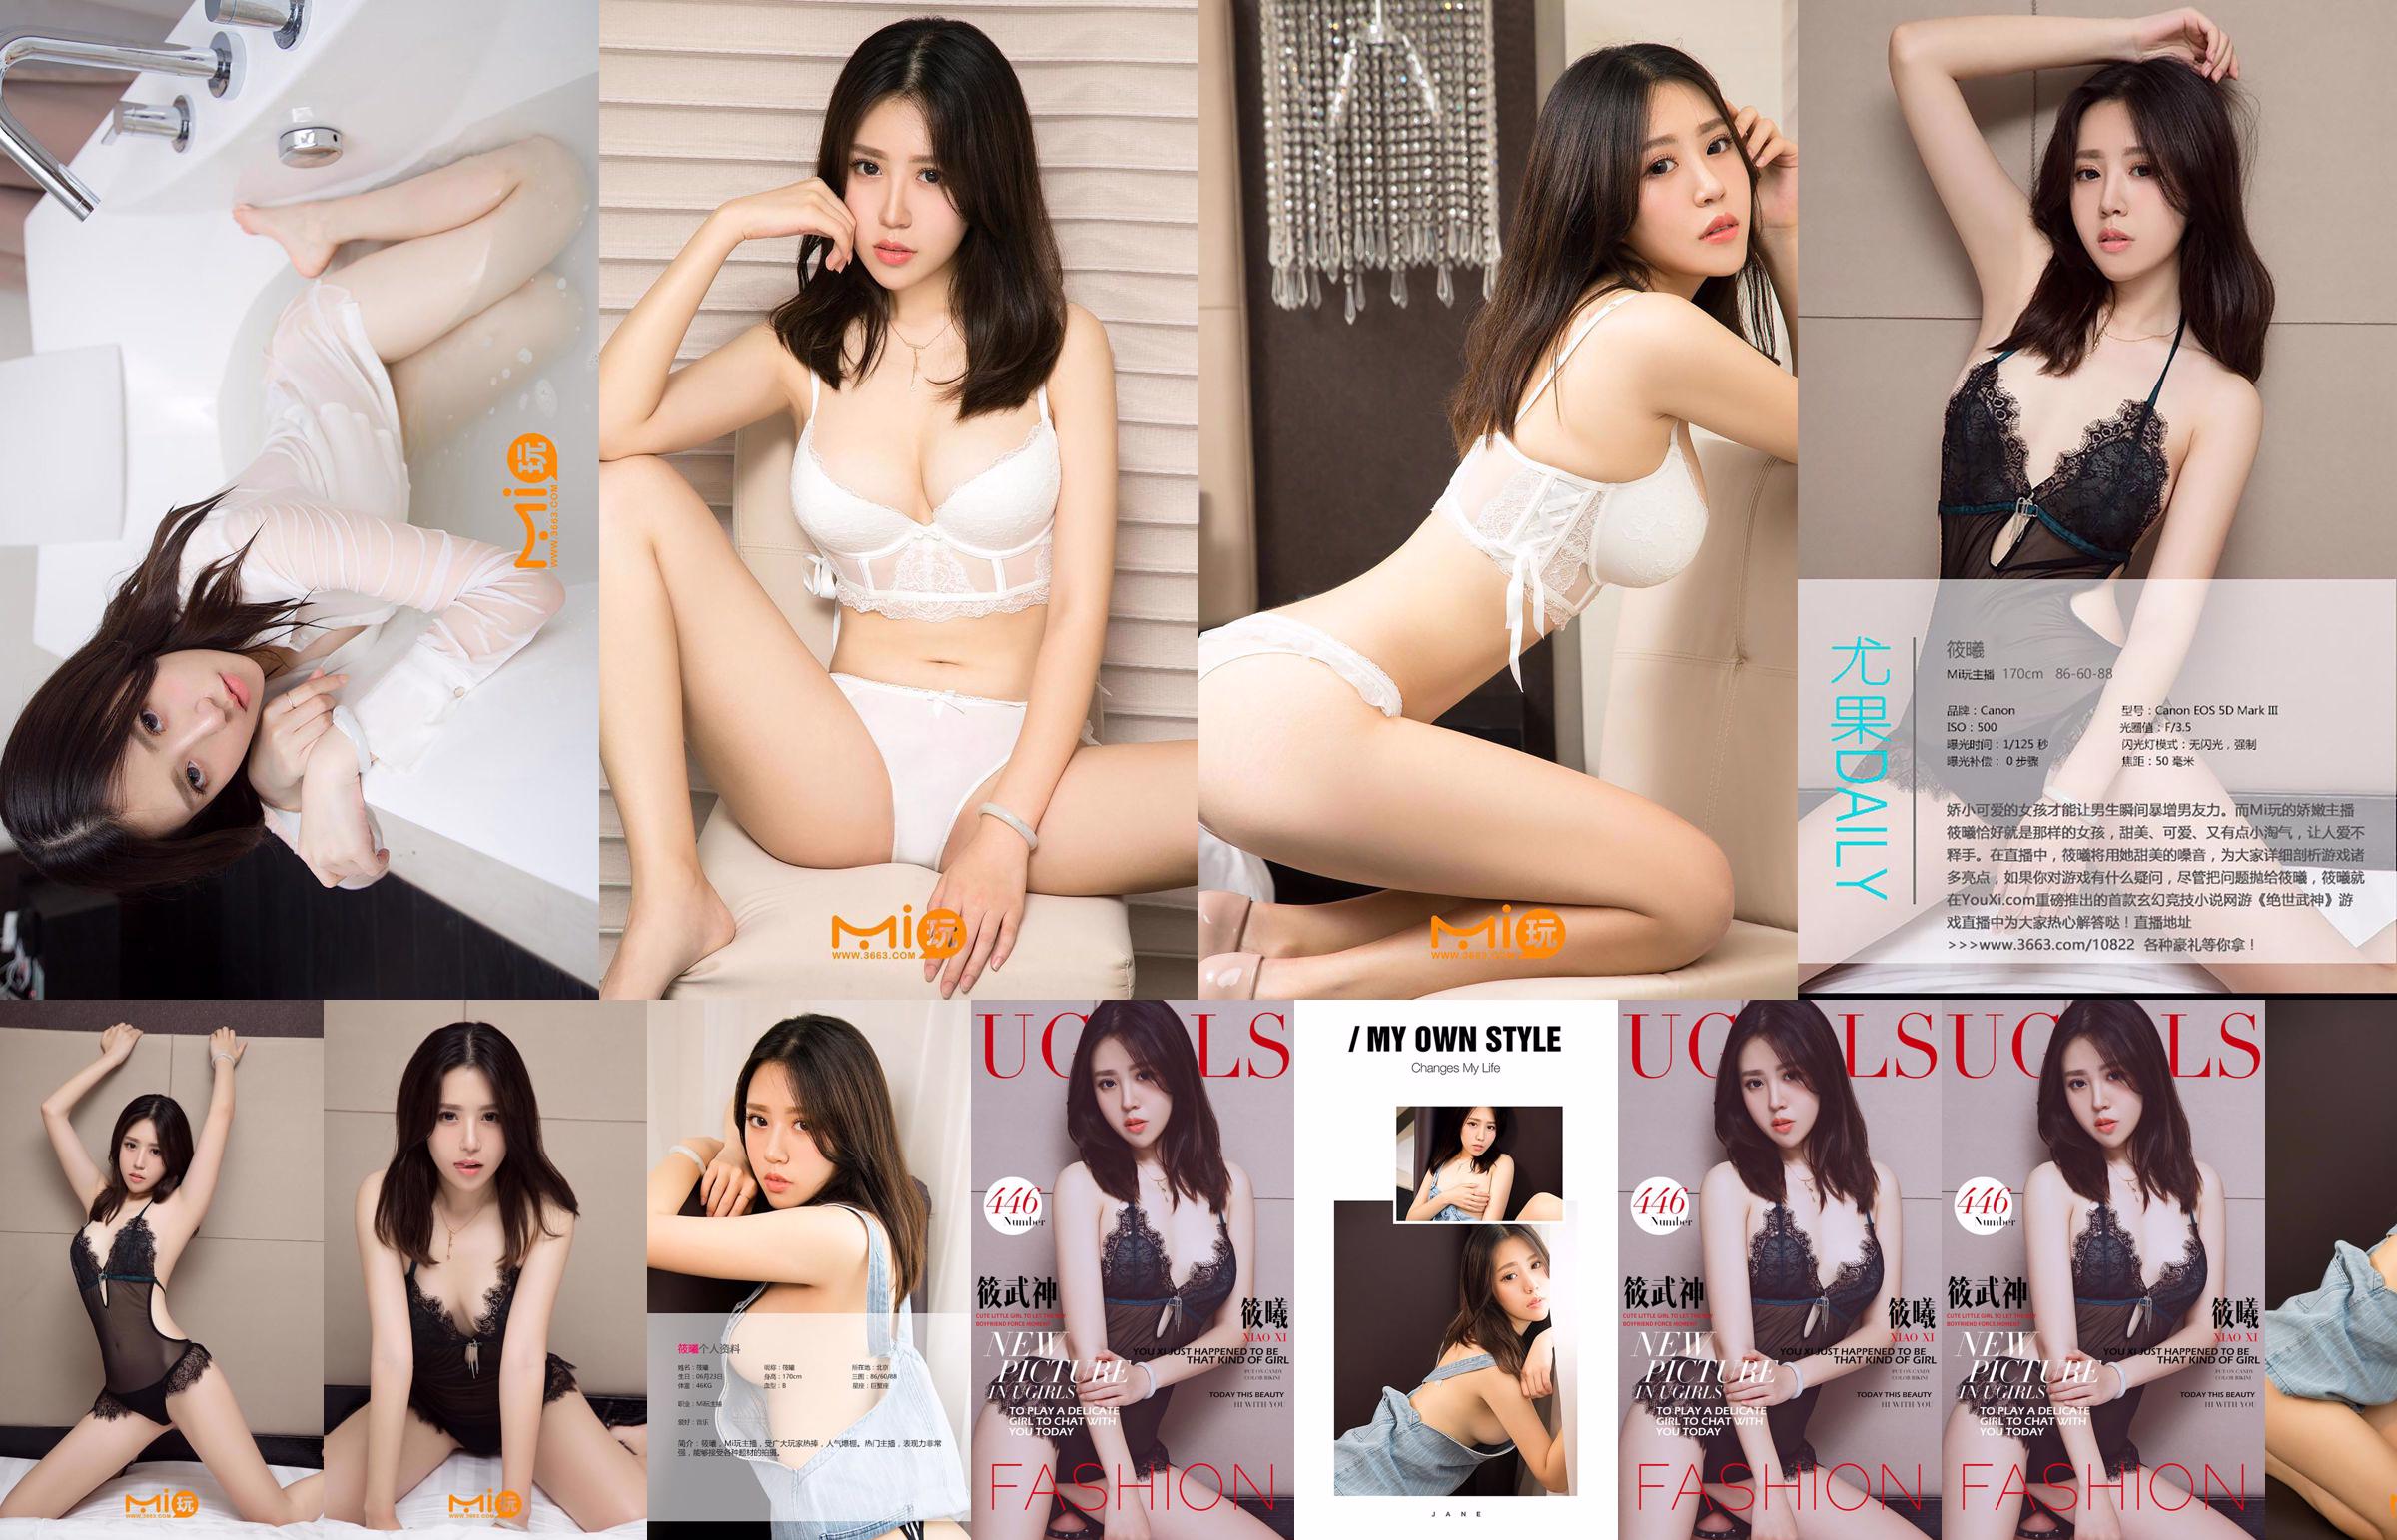 Xiao Xi «Xiao Wu Shen» [爱 优 物 Ugirls] N ° 446 No.67fd8c Page 20